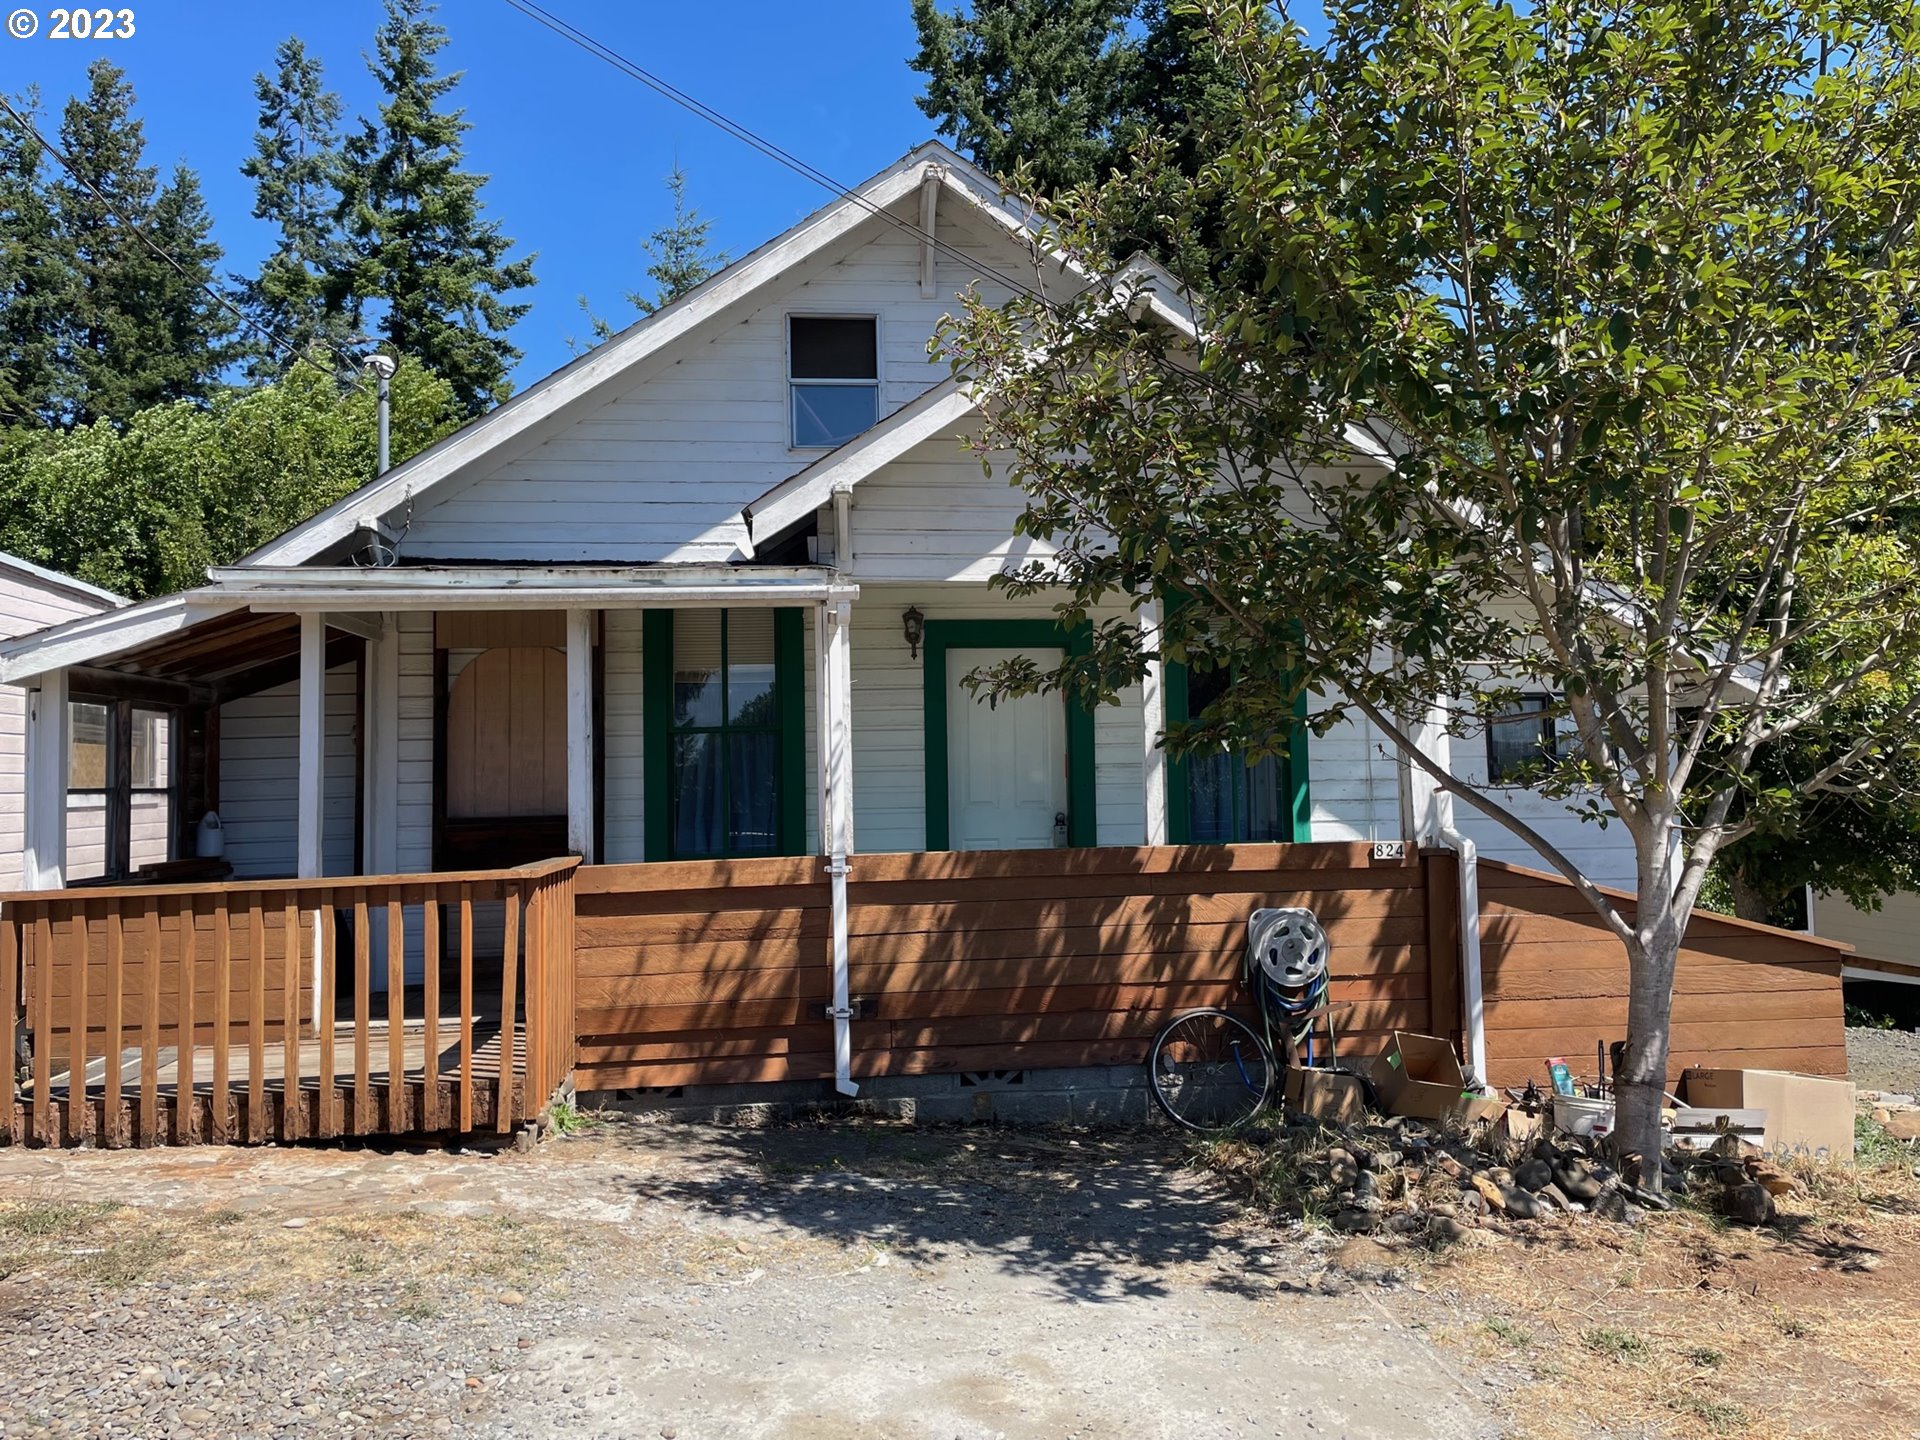 824 N HENRY ST, Coquille, OR 97423